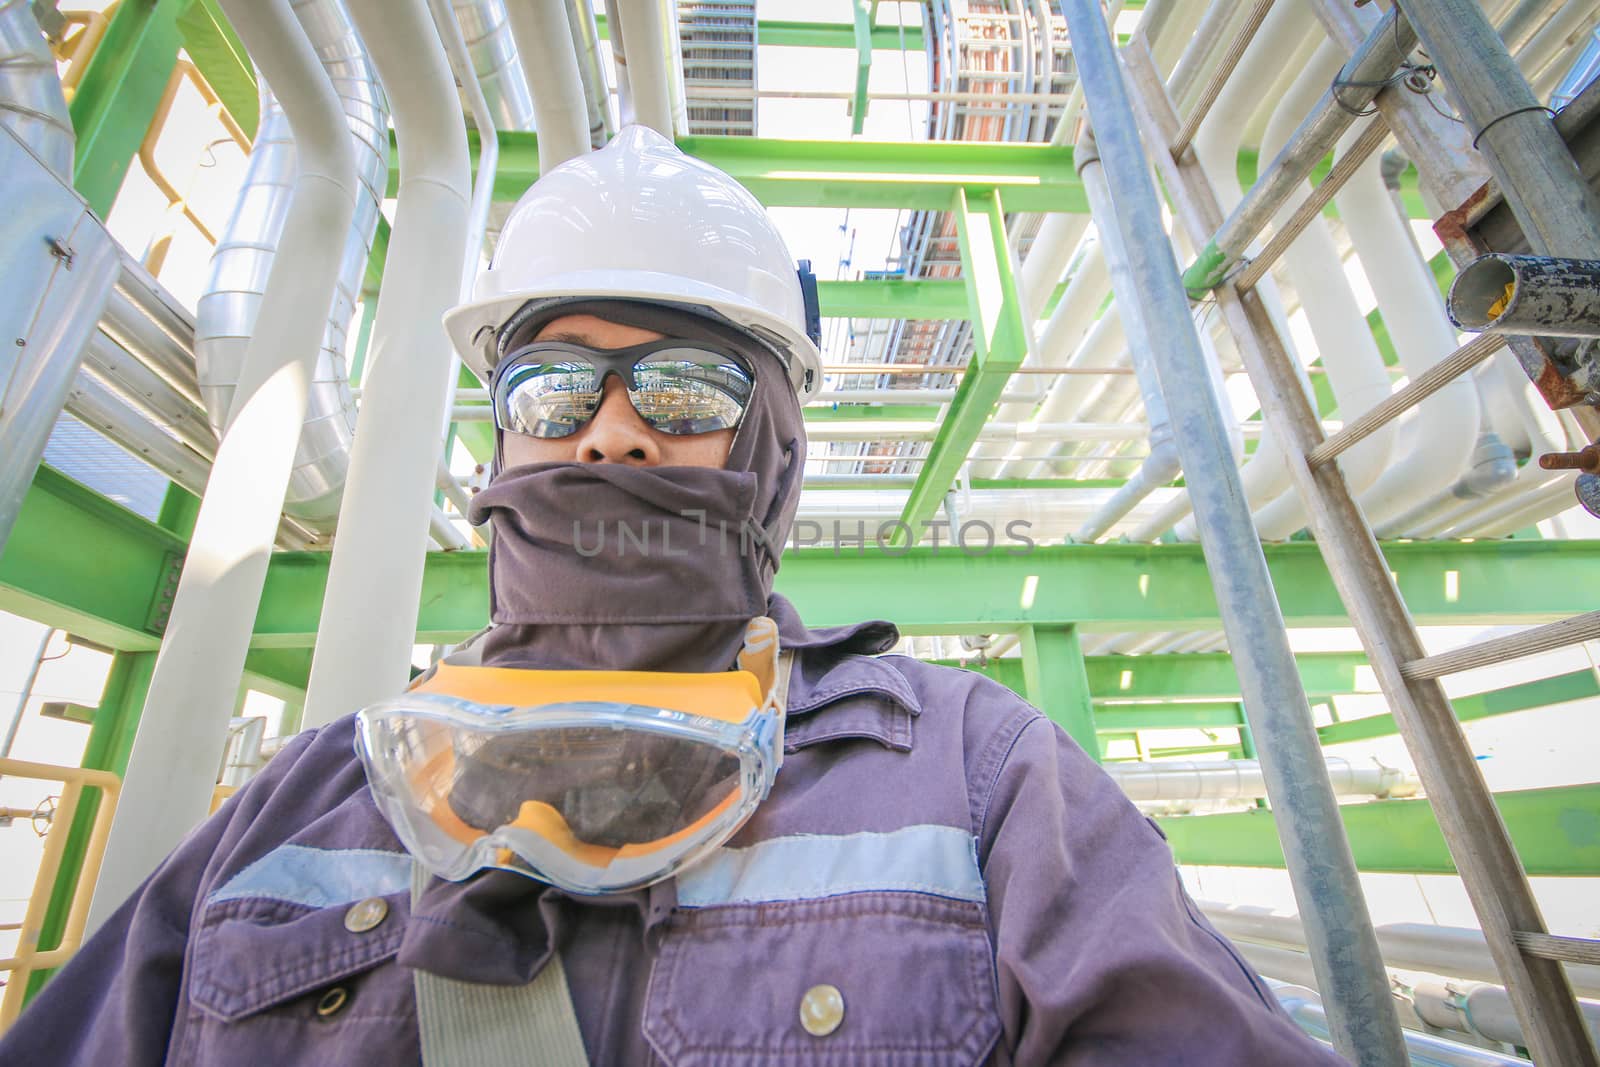 Man with safety personal protection equipment in industrial plant background 